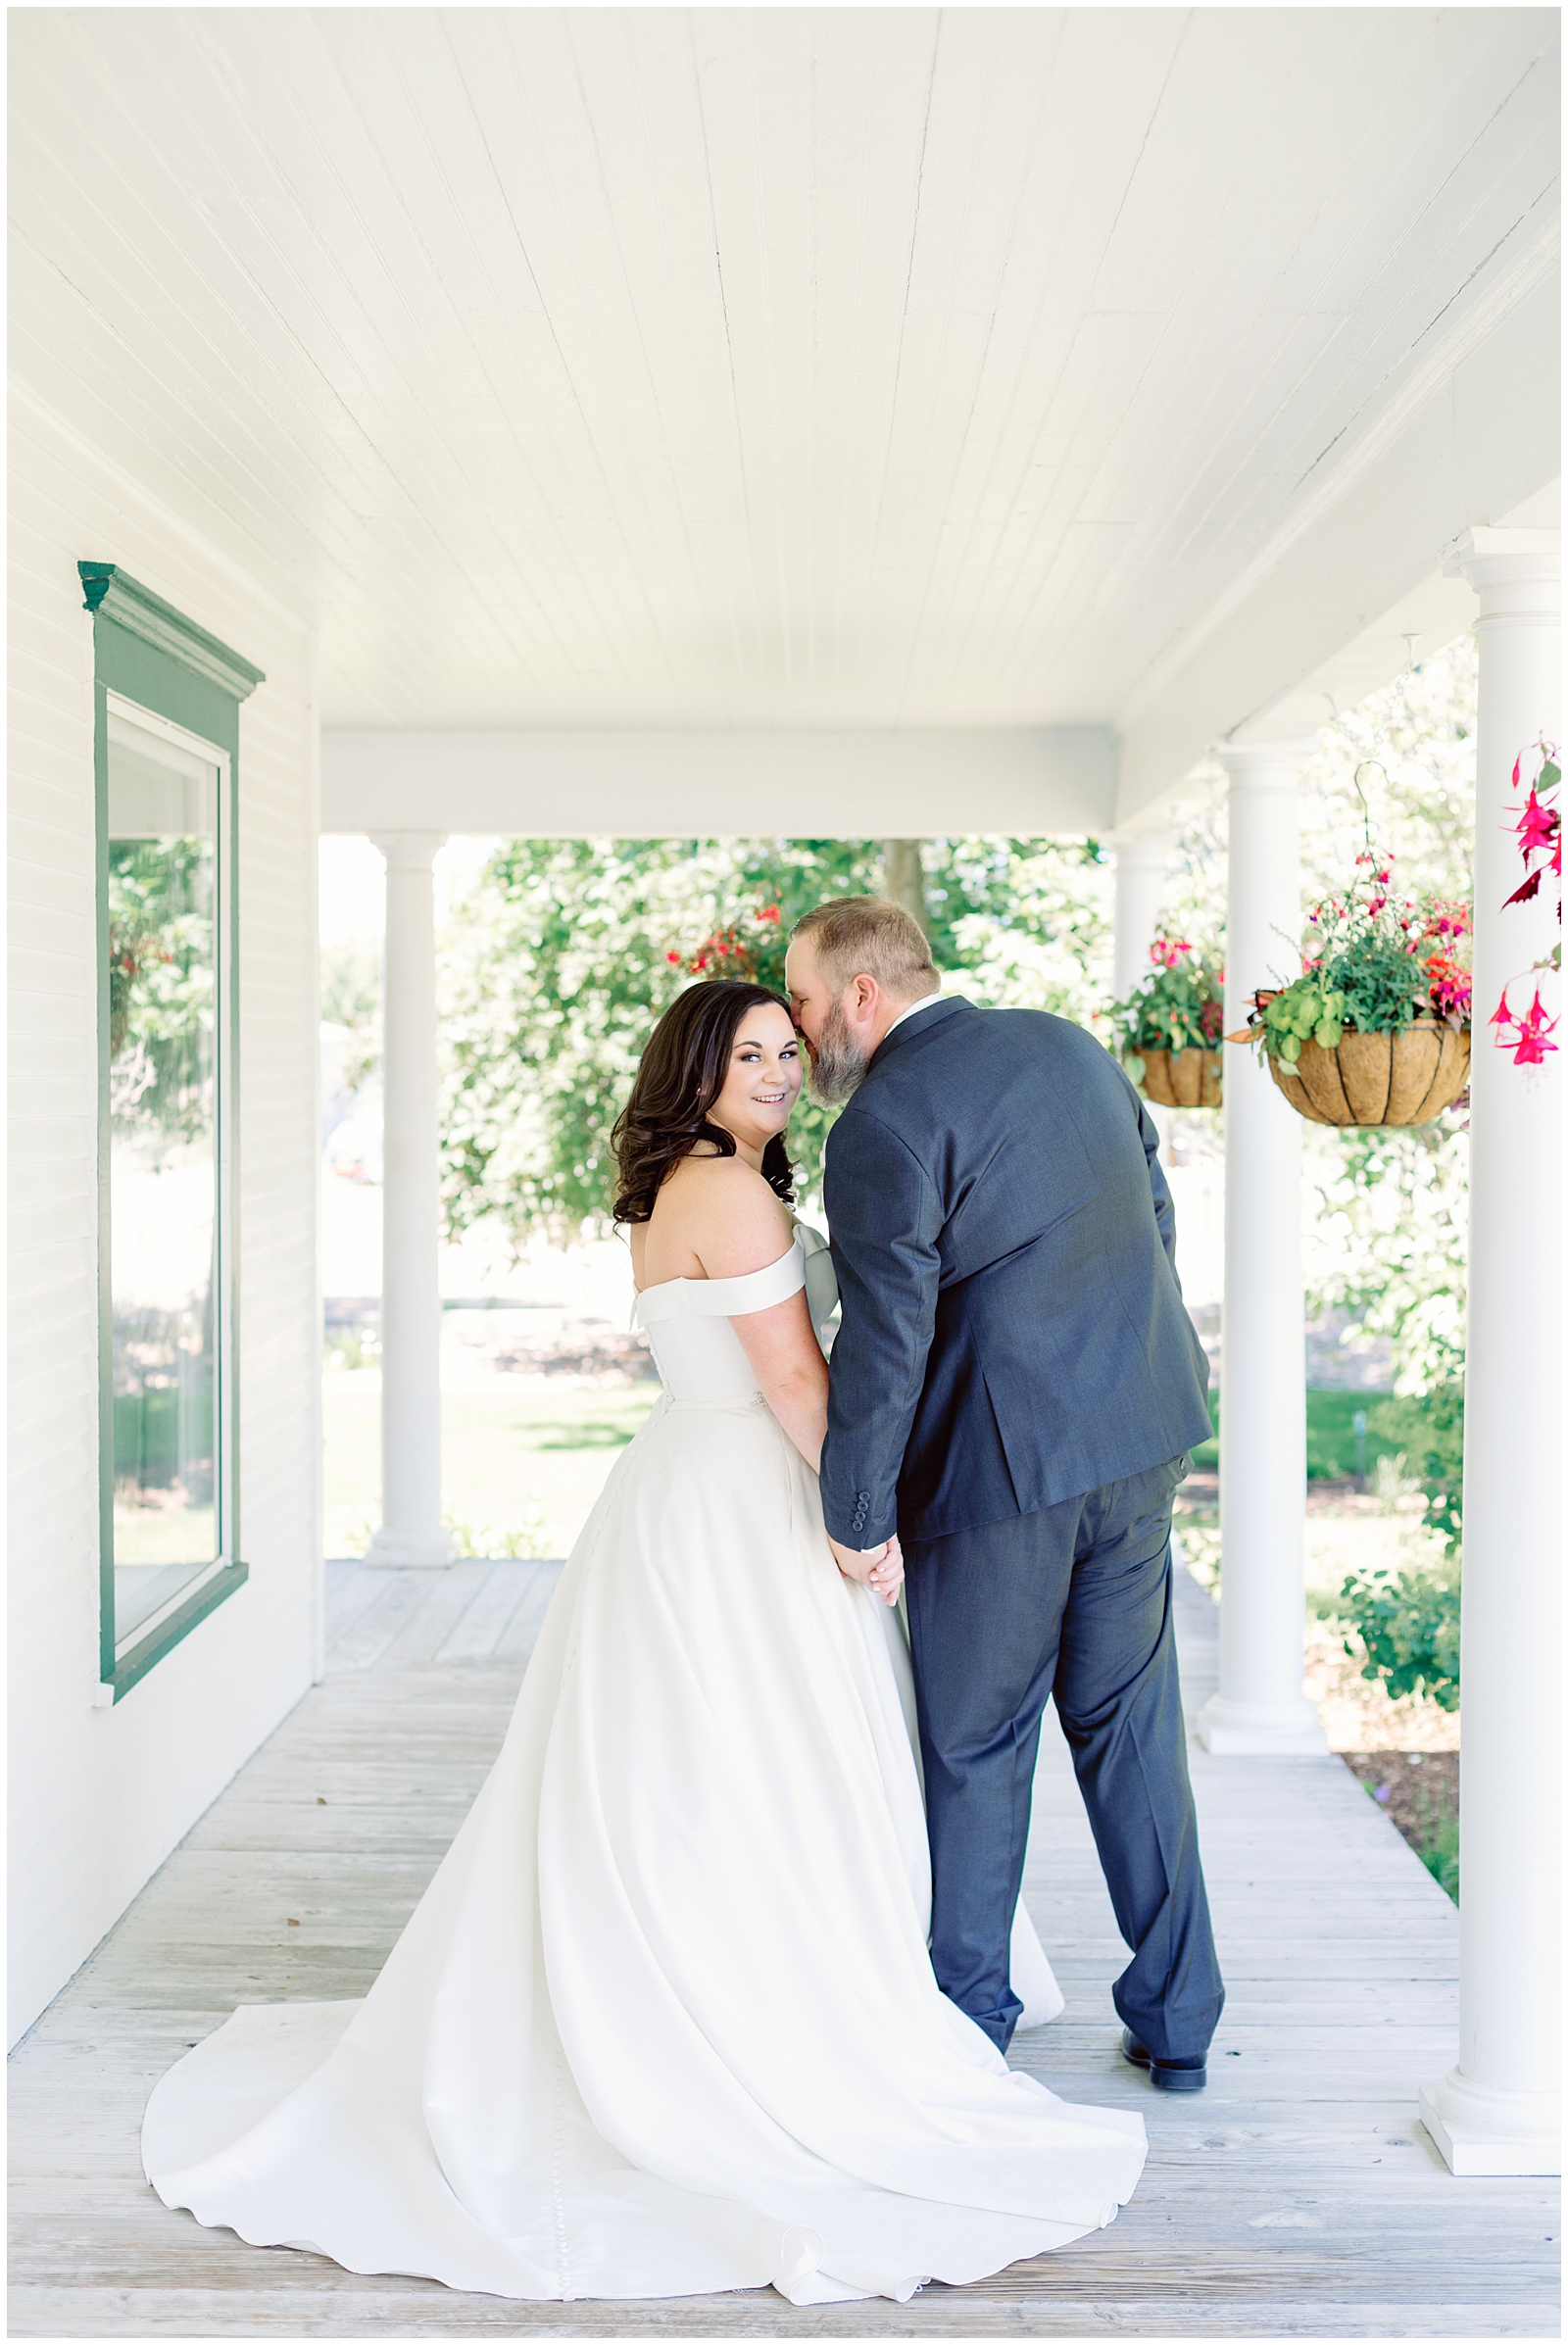 Bride and Groom Portraits together on the wedding day at dreamy idaho garden wedding